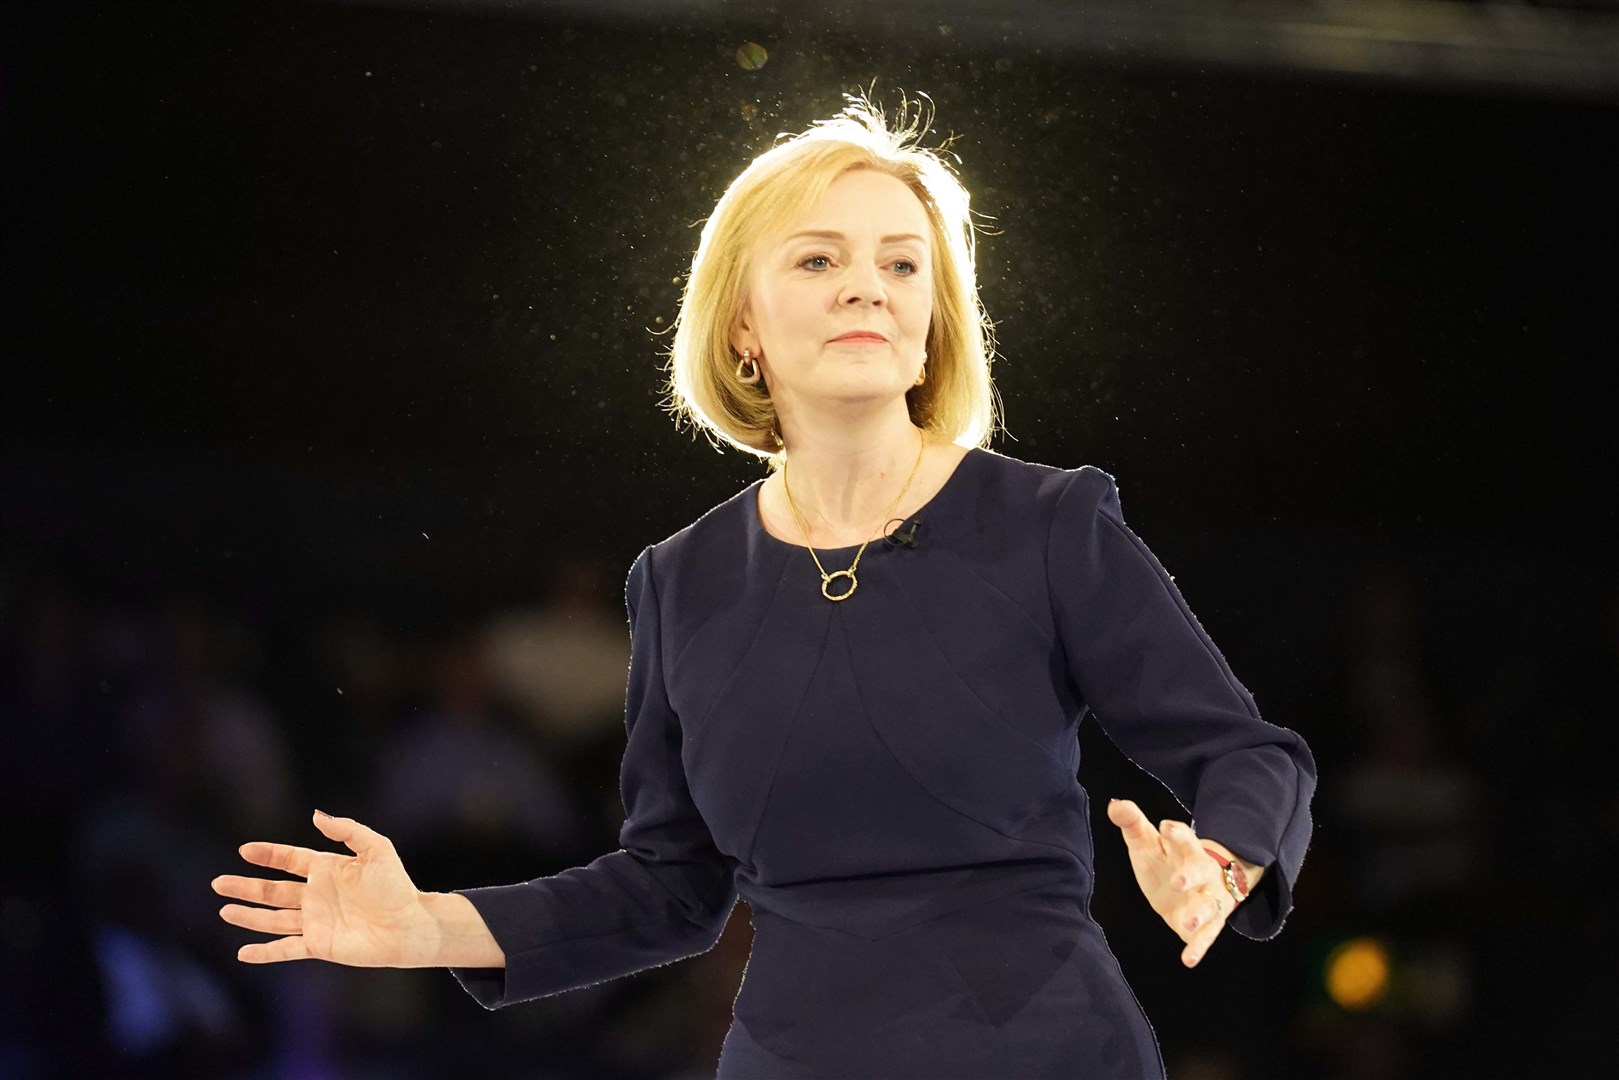 Liz Truss claimed there would be no new taxes or energy rationing if she became prime minister (Stefan Rousseau/PA)